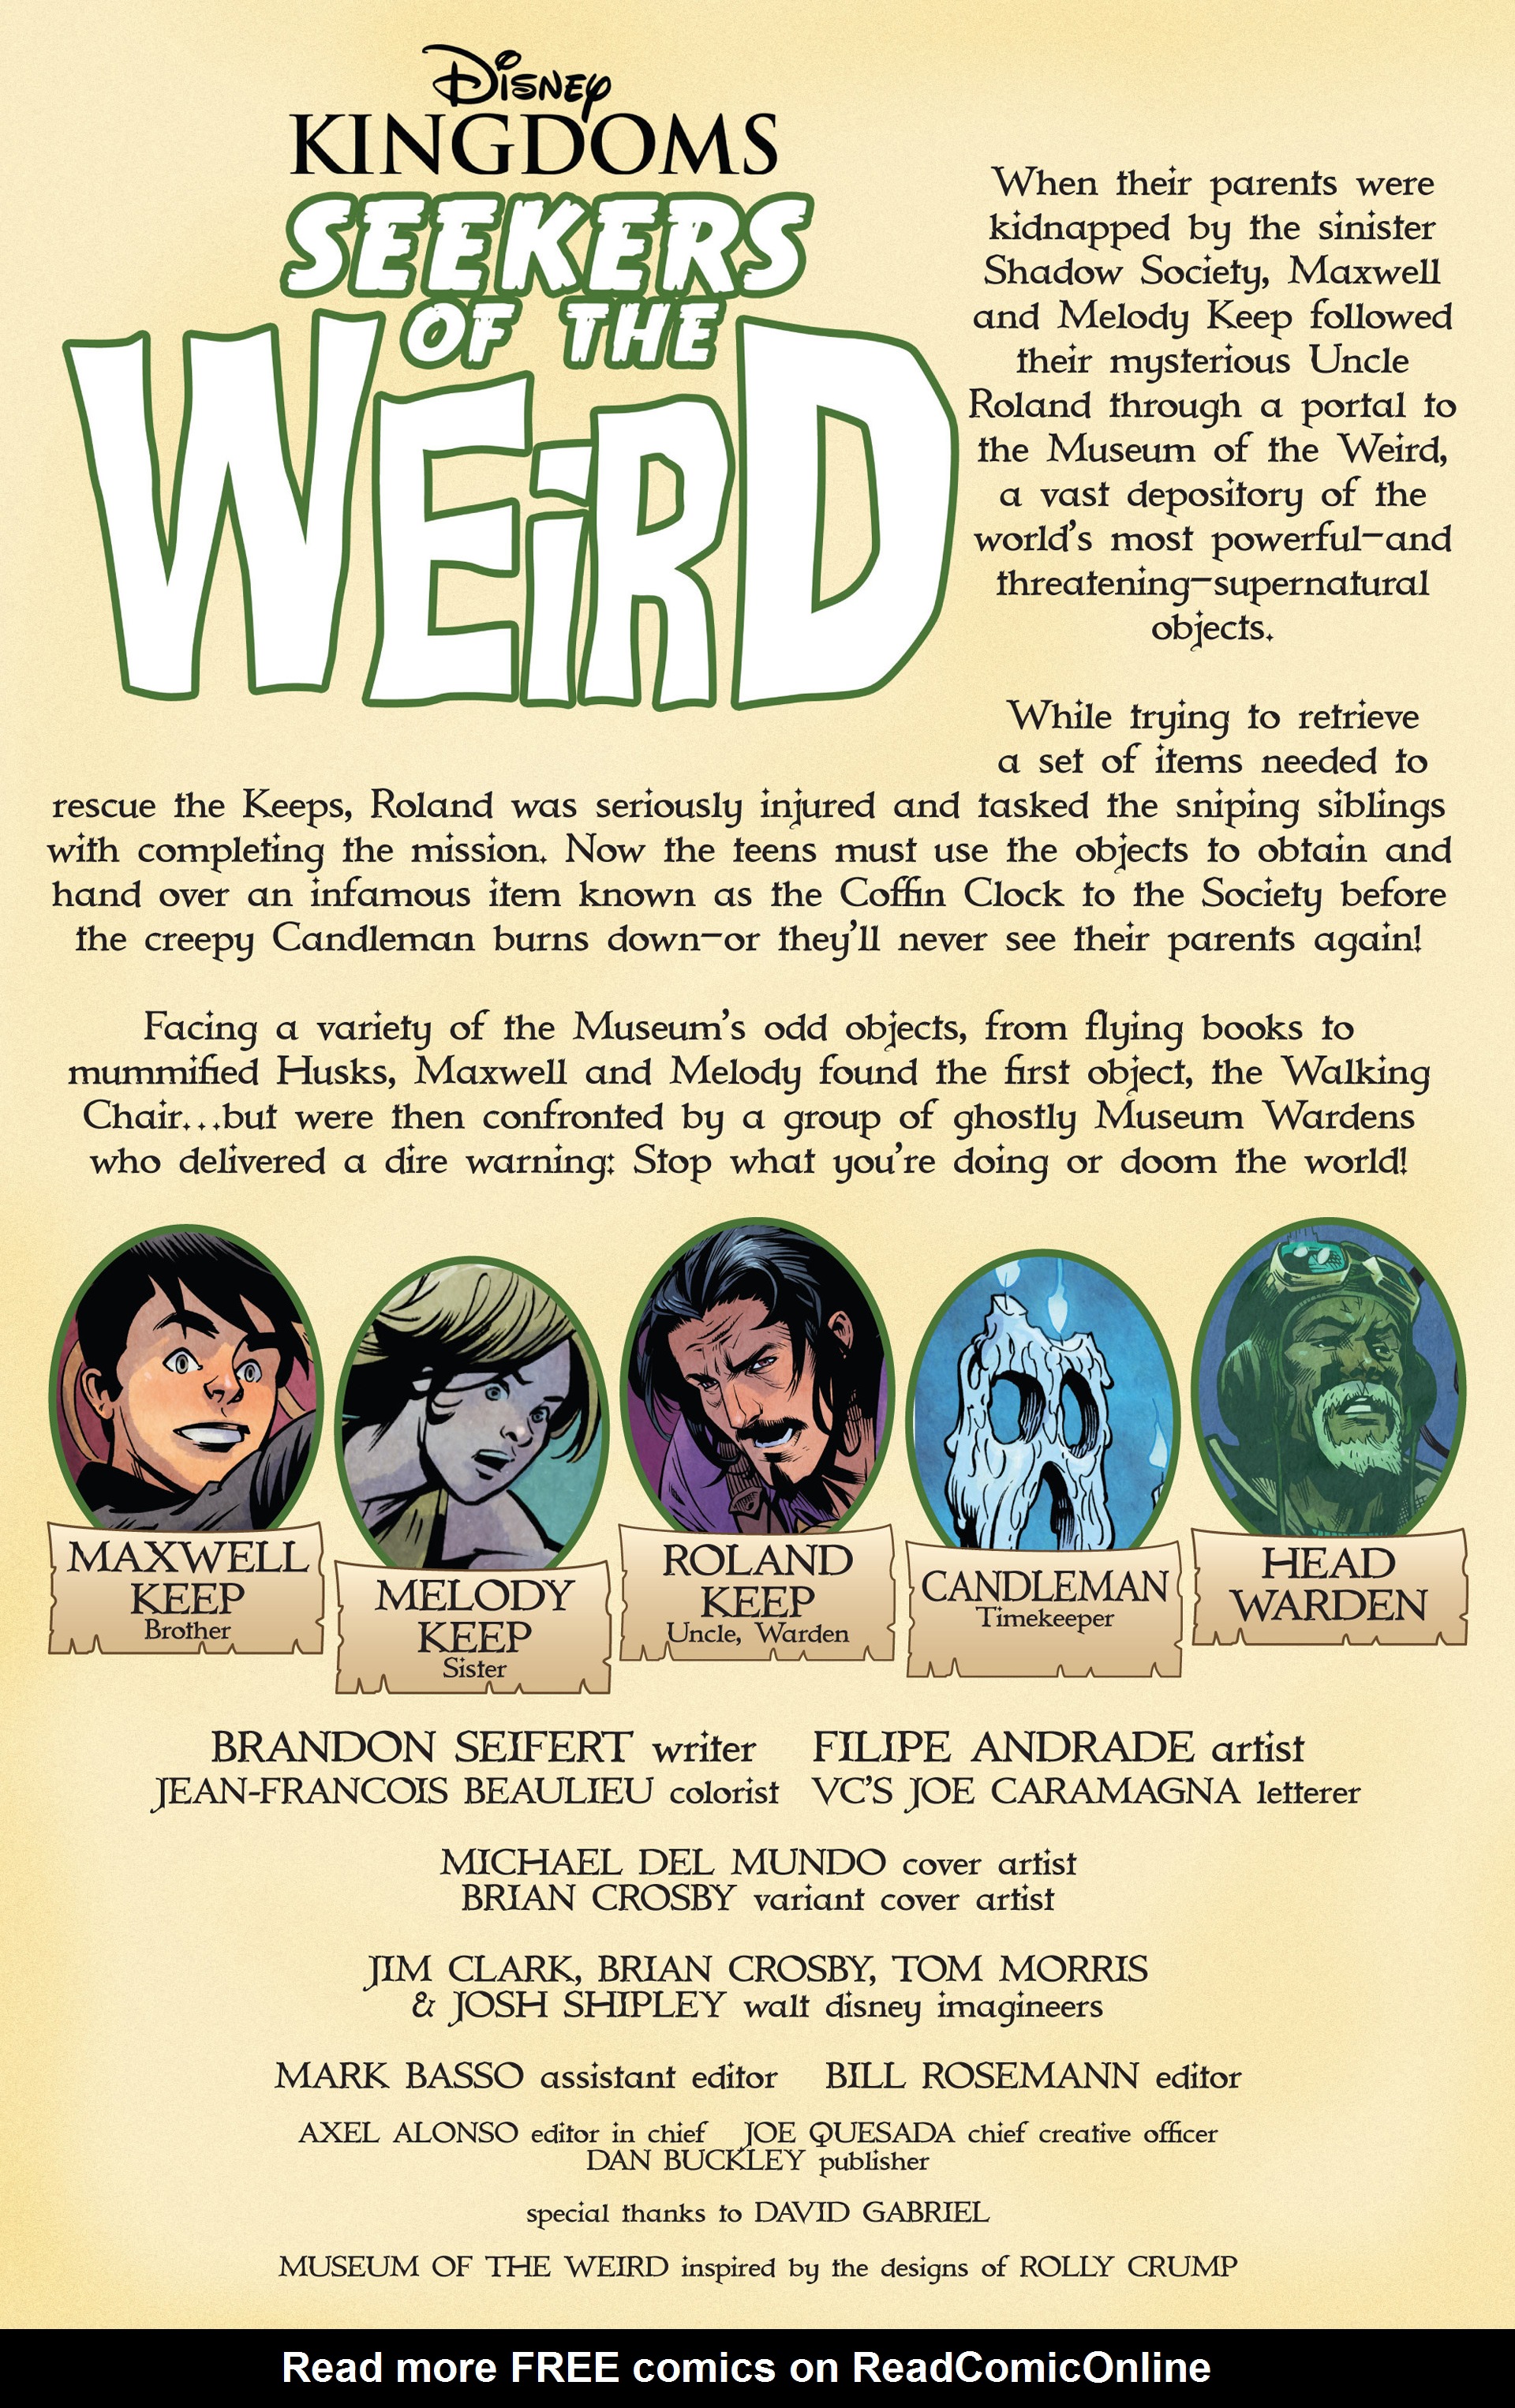 Read online Disney Kingdoms: Seekers of the Weird comic -  Issue #3 - 2